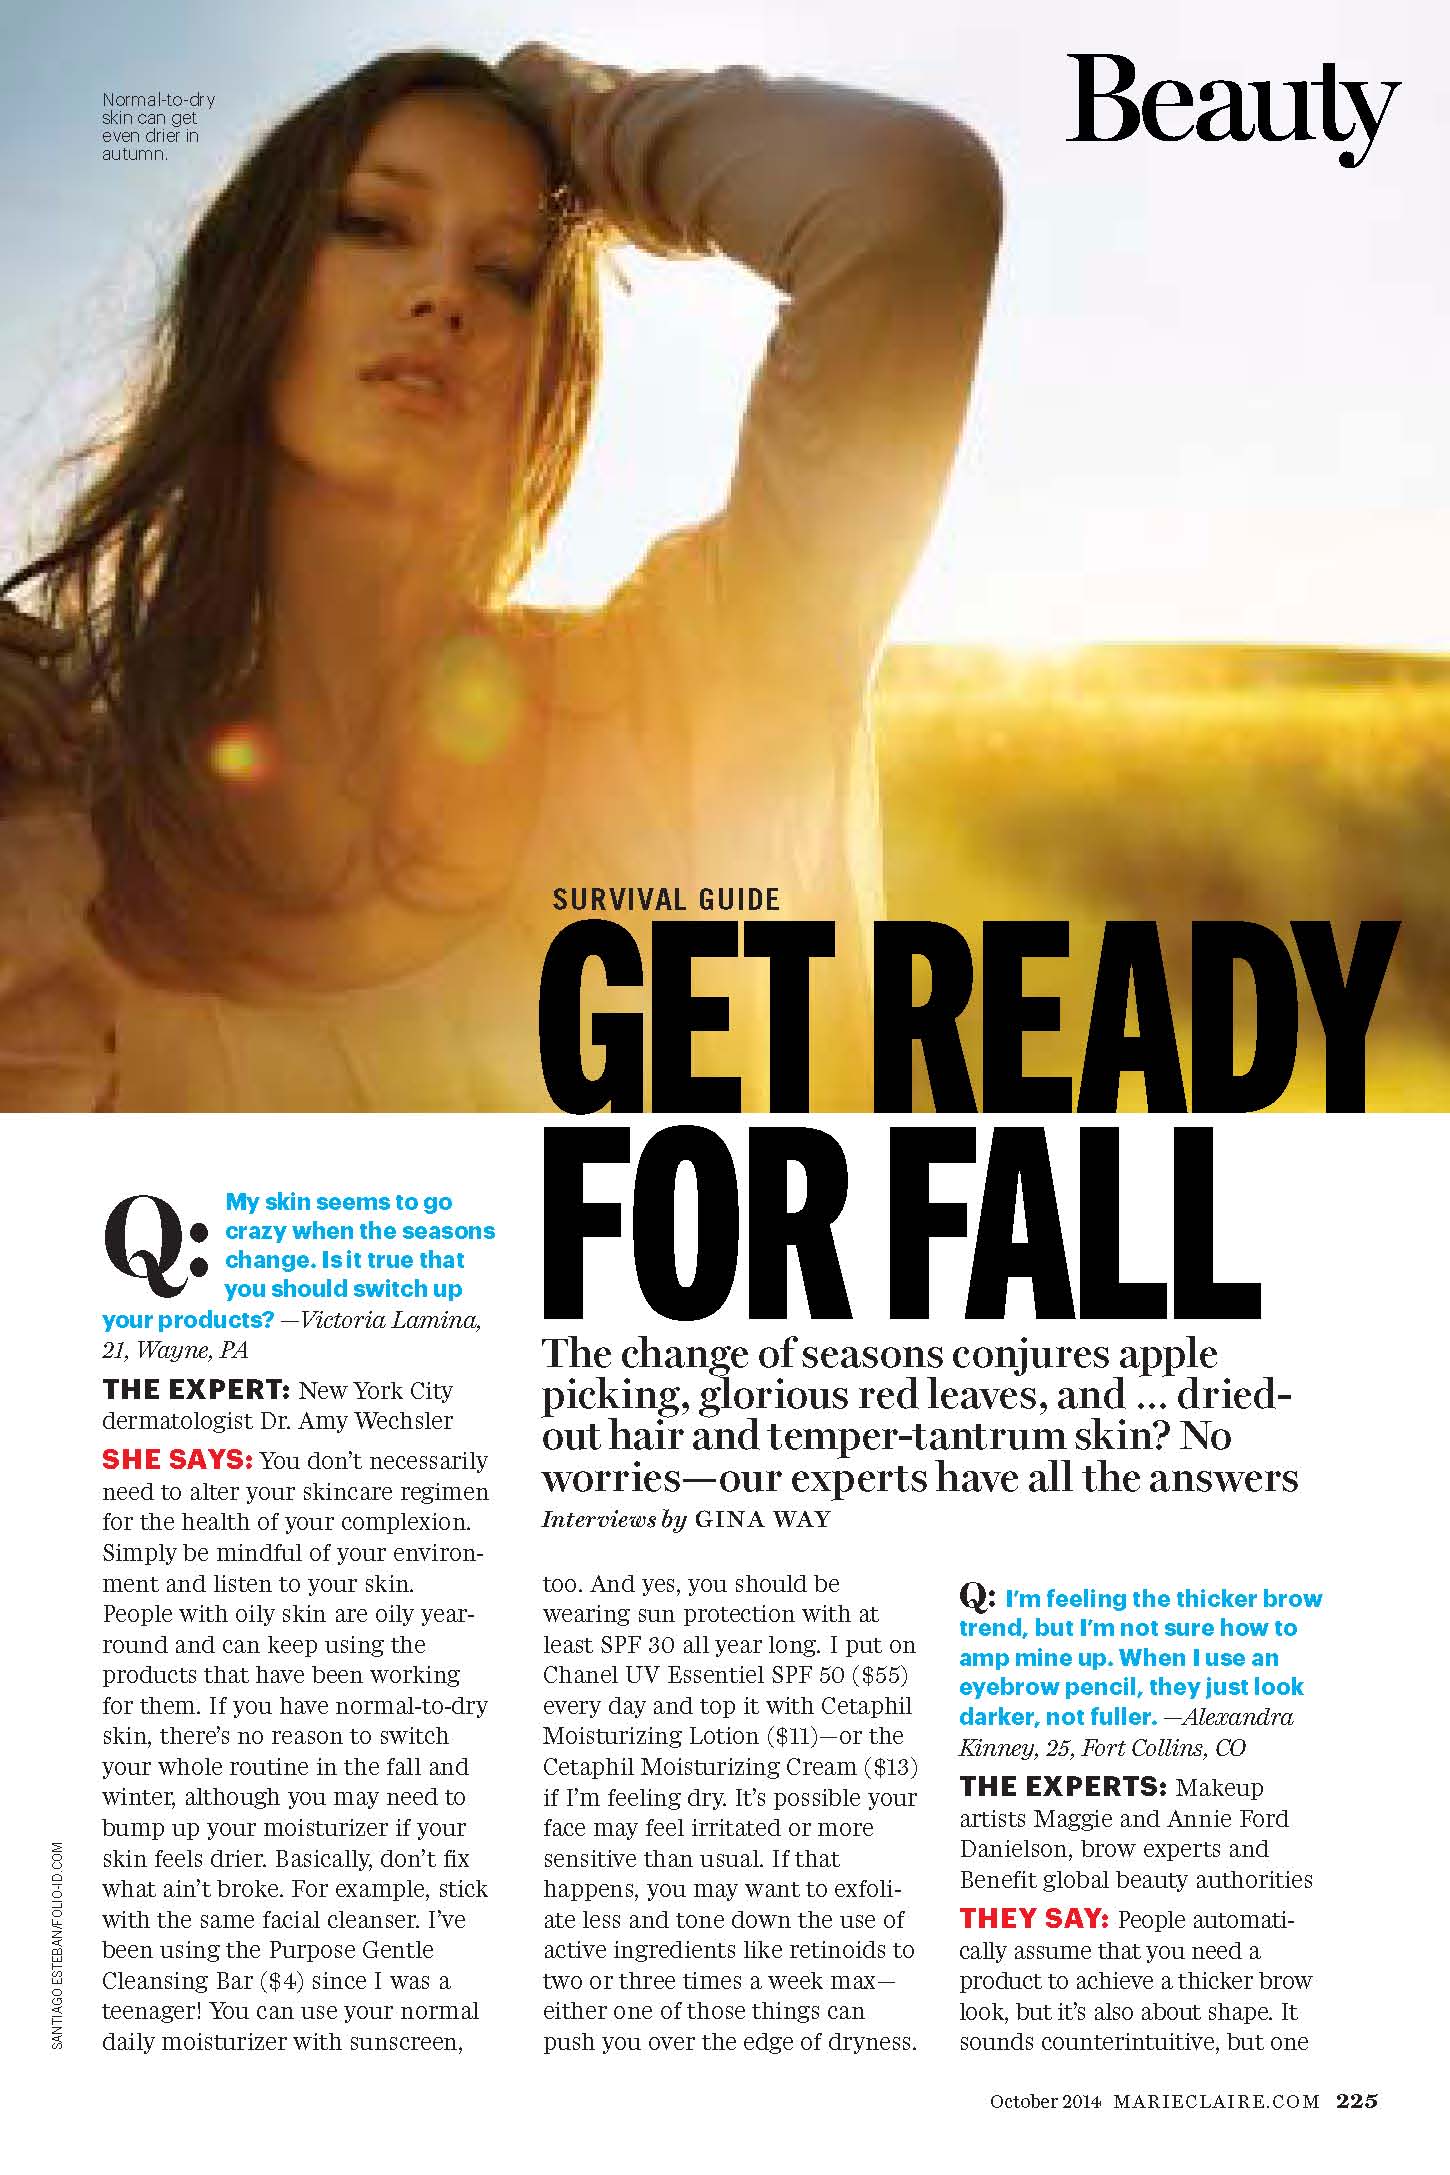 Survival Guide October 2014_Page_1.jpg